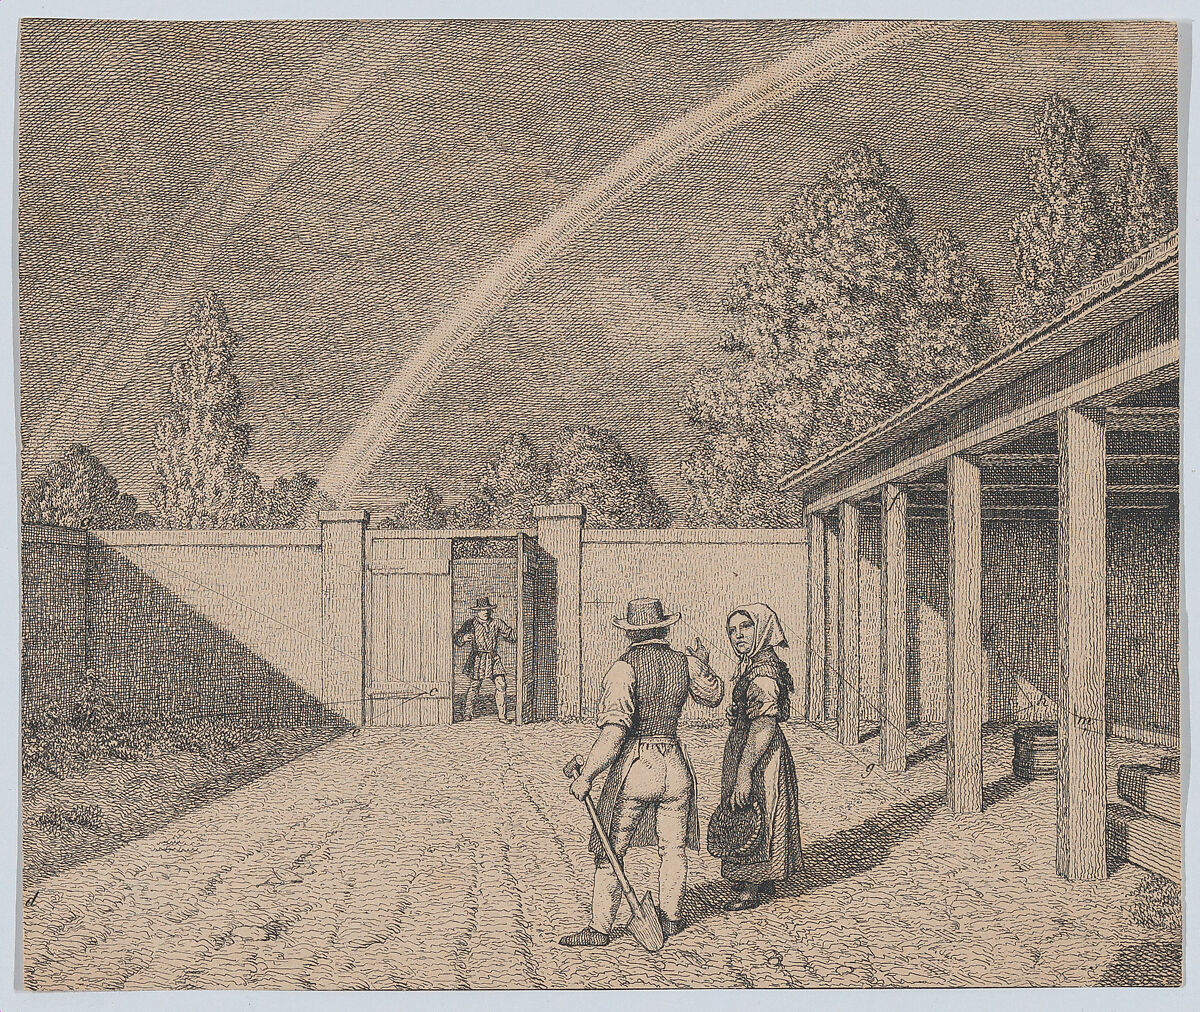 A couple conversing in a stable yard, with a double rainbow overhead, from 'Linear Perspective, Applied to the Art of Painting', Christoffer Wilhelm Eckersberg (Danish, Blåkrog 1783–1853 Copenhagen), Etching 